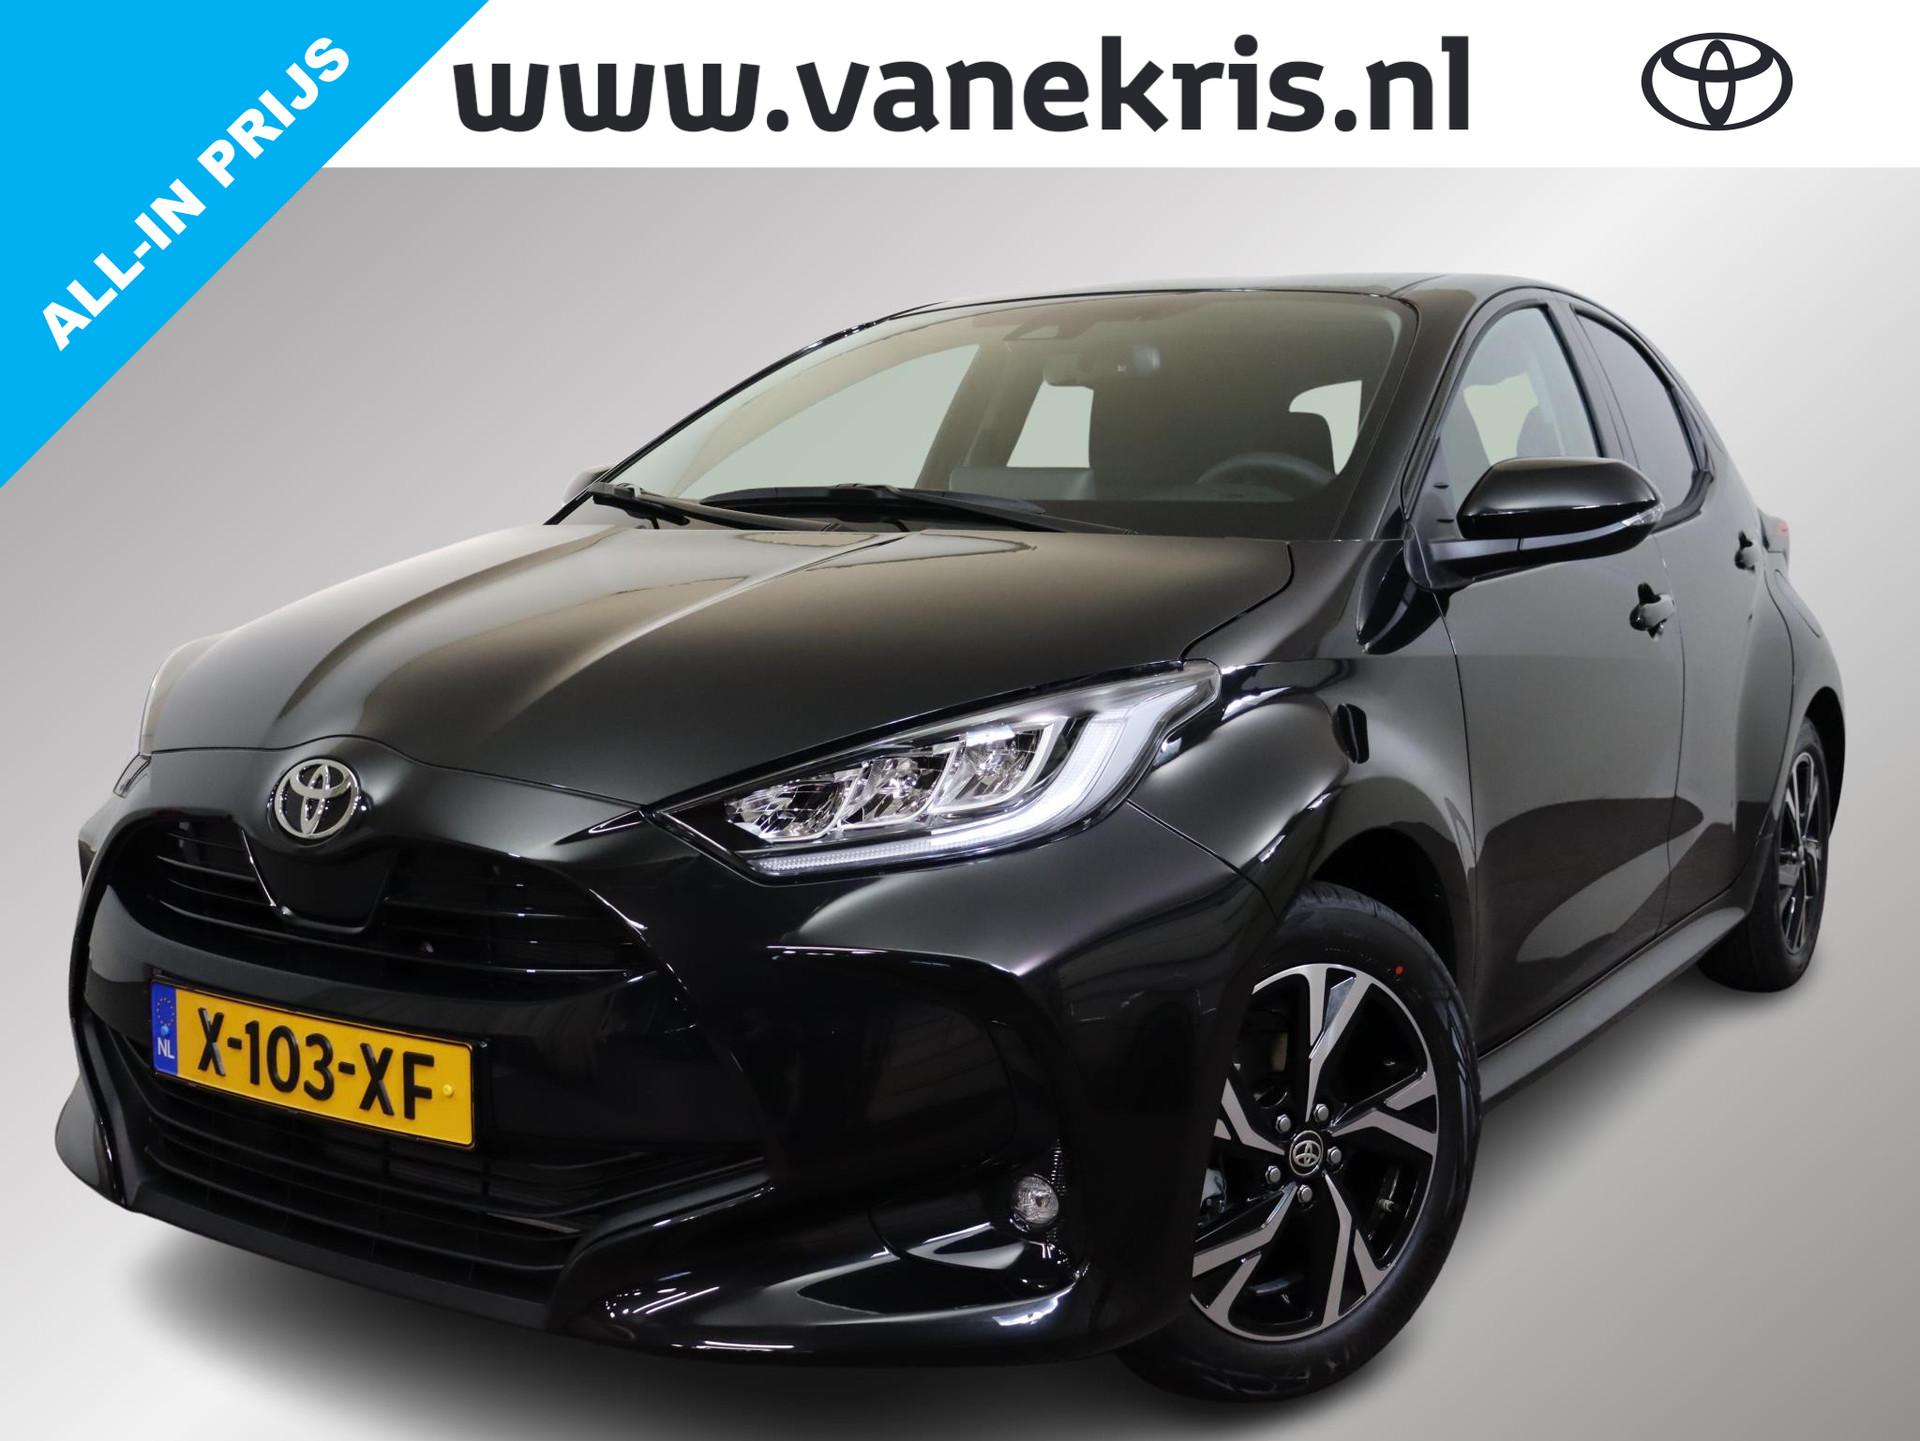 Toyota Yaris 1.5 VVT-i First Edition, NAVI, Smart key, 16 Inch Lm velgen, Draadloos Apple care play & Android auto!!